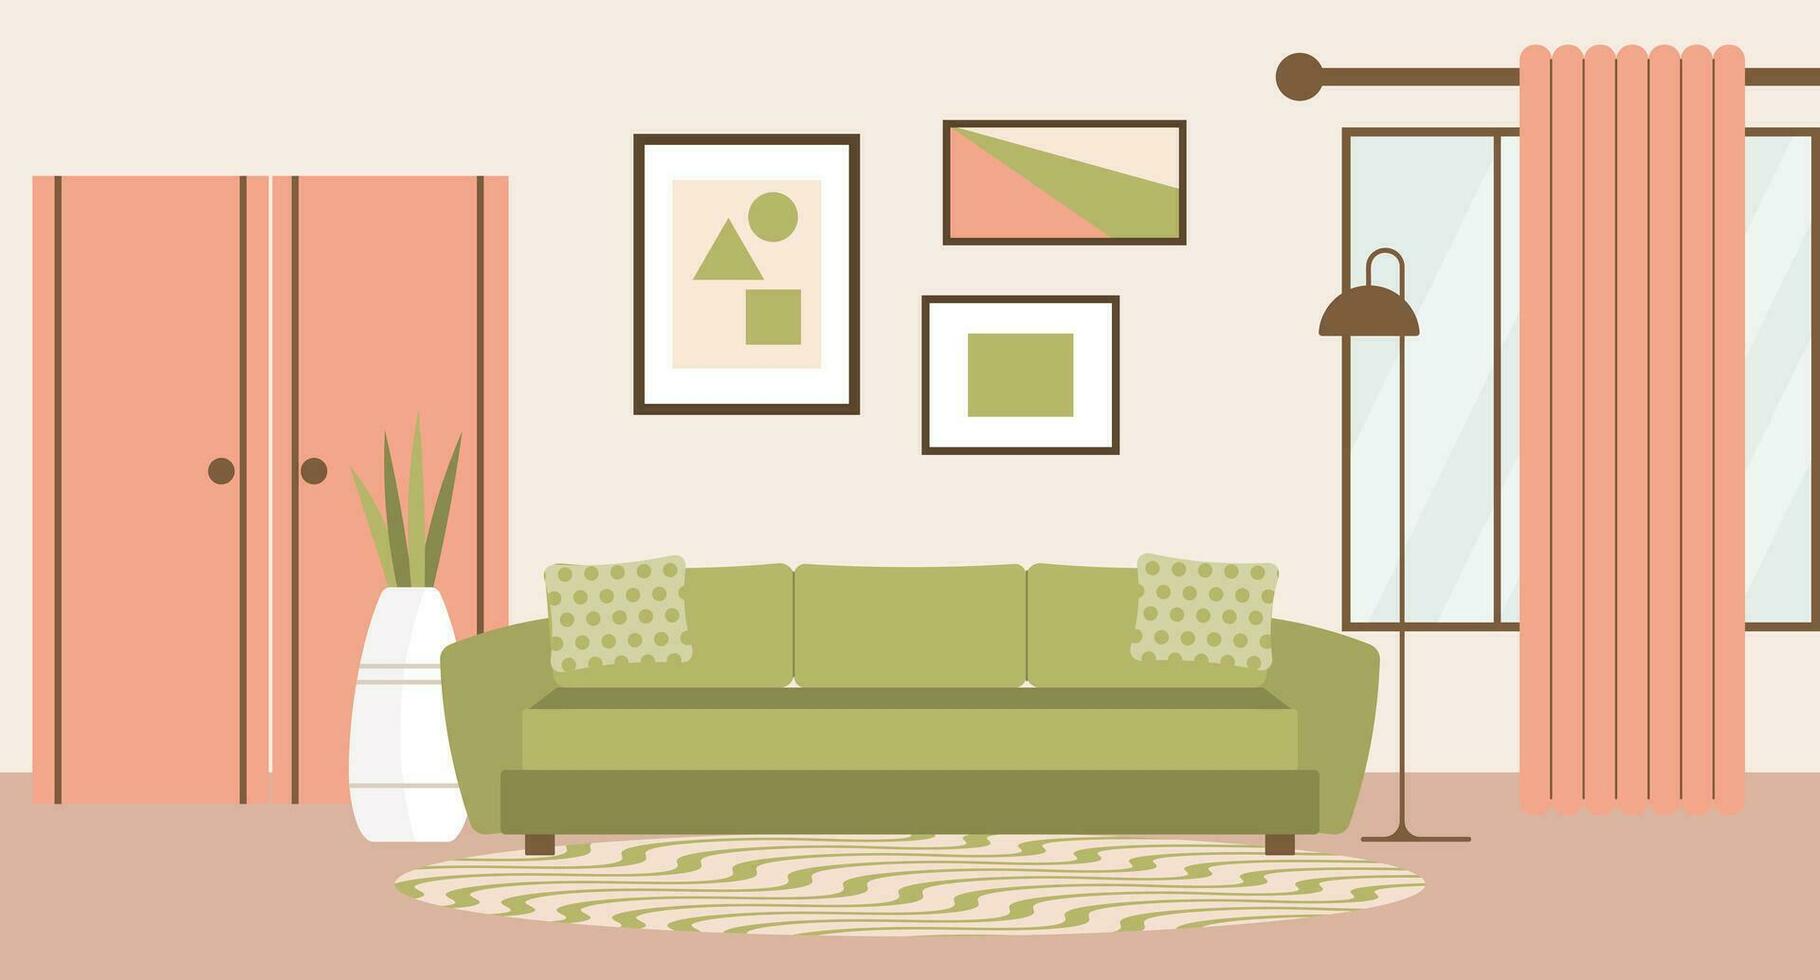 Living room with sofa, house plants, bedside table, window with curtains, bookcase and paintings on the wall. Flat interior in minimal style, vector